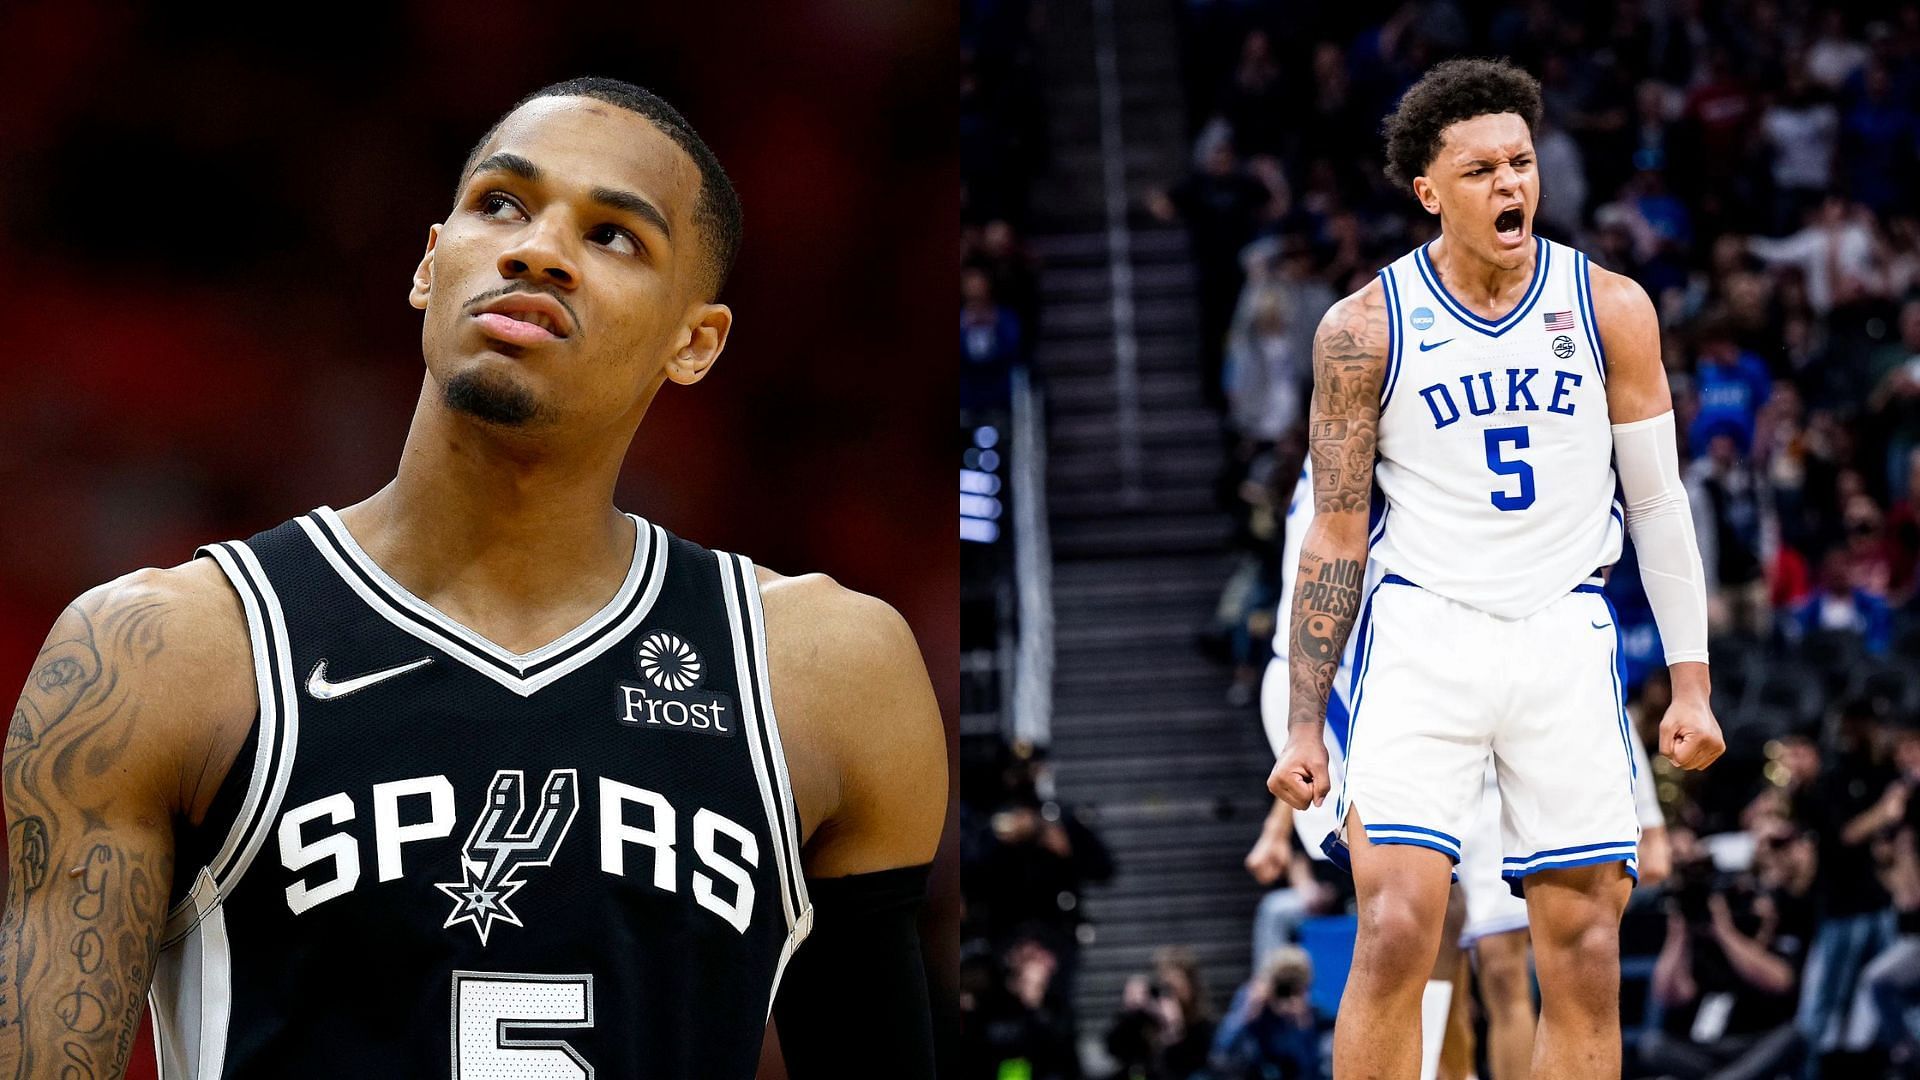 Developing beef between Dejounte Murray and Paolo Banchero